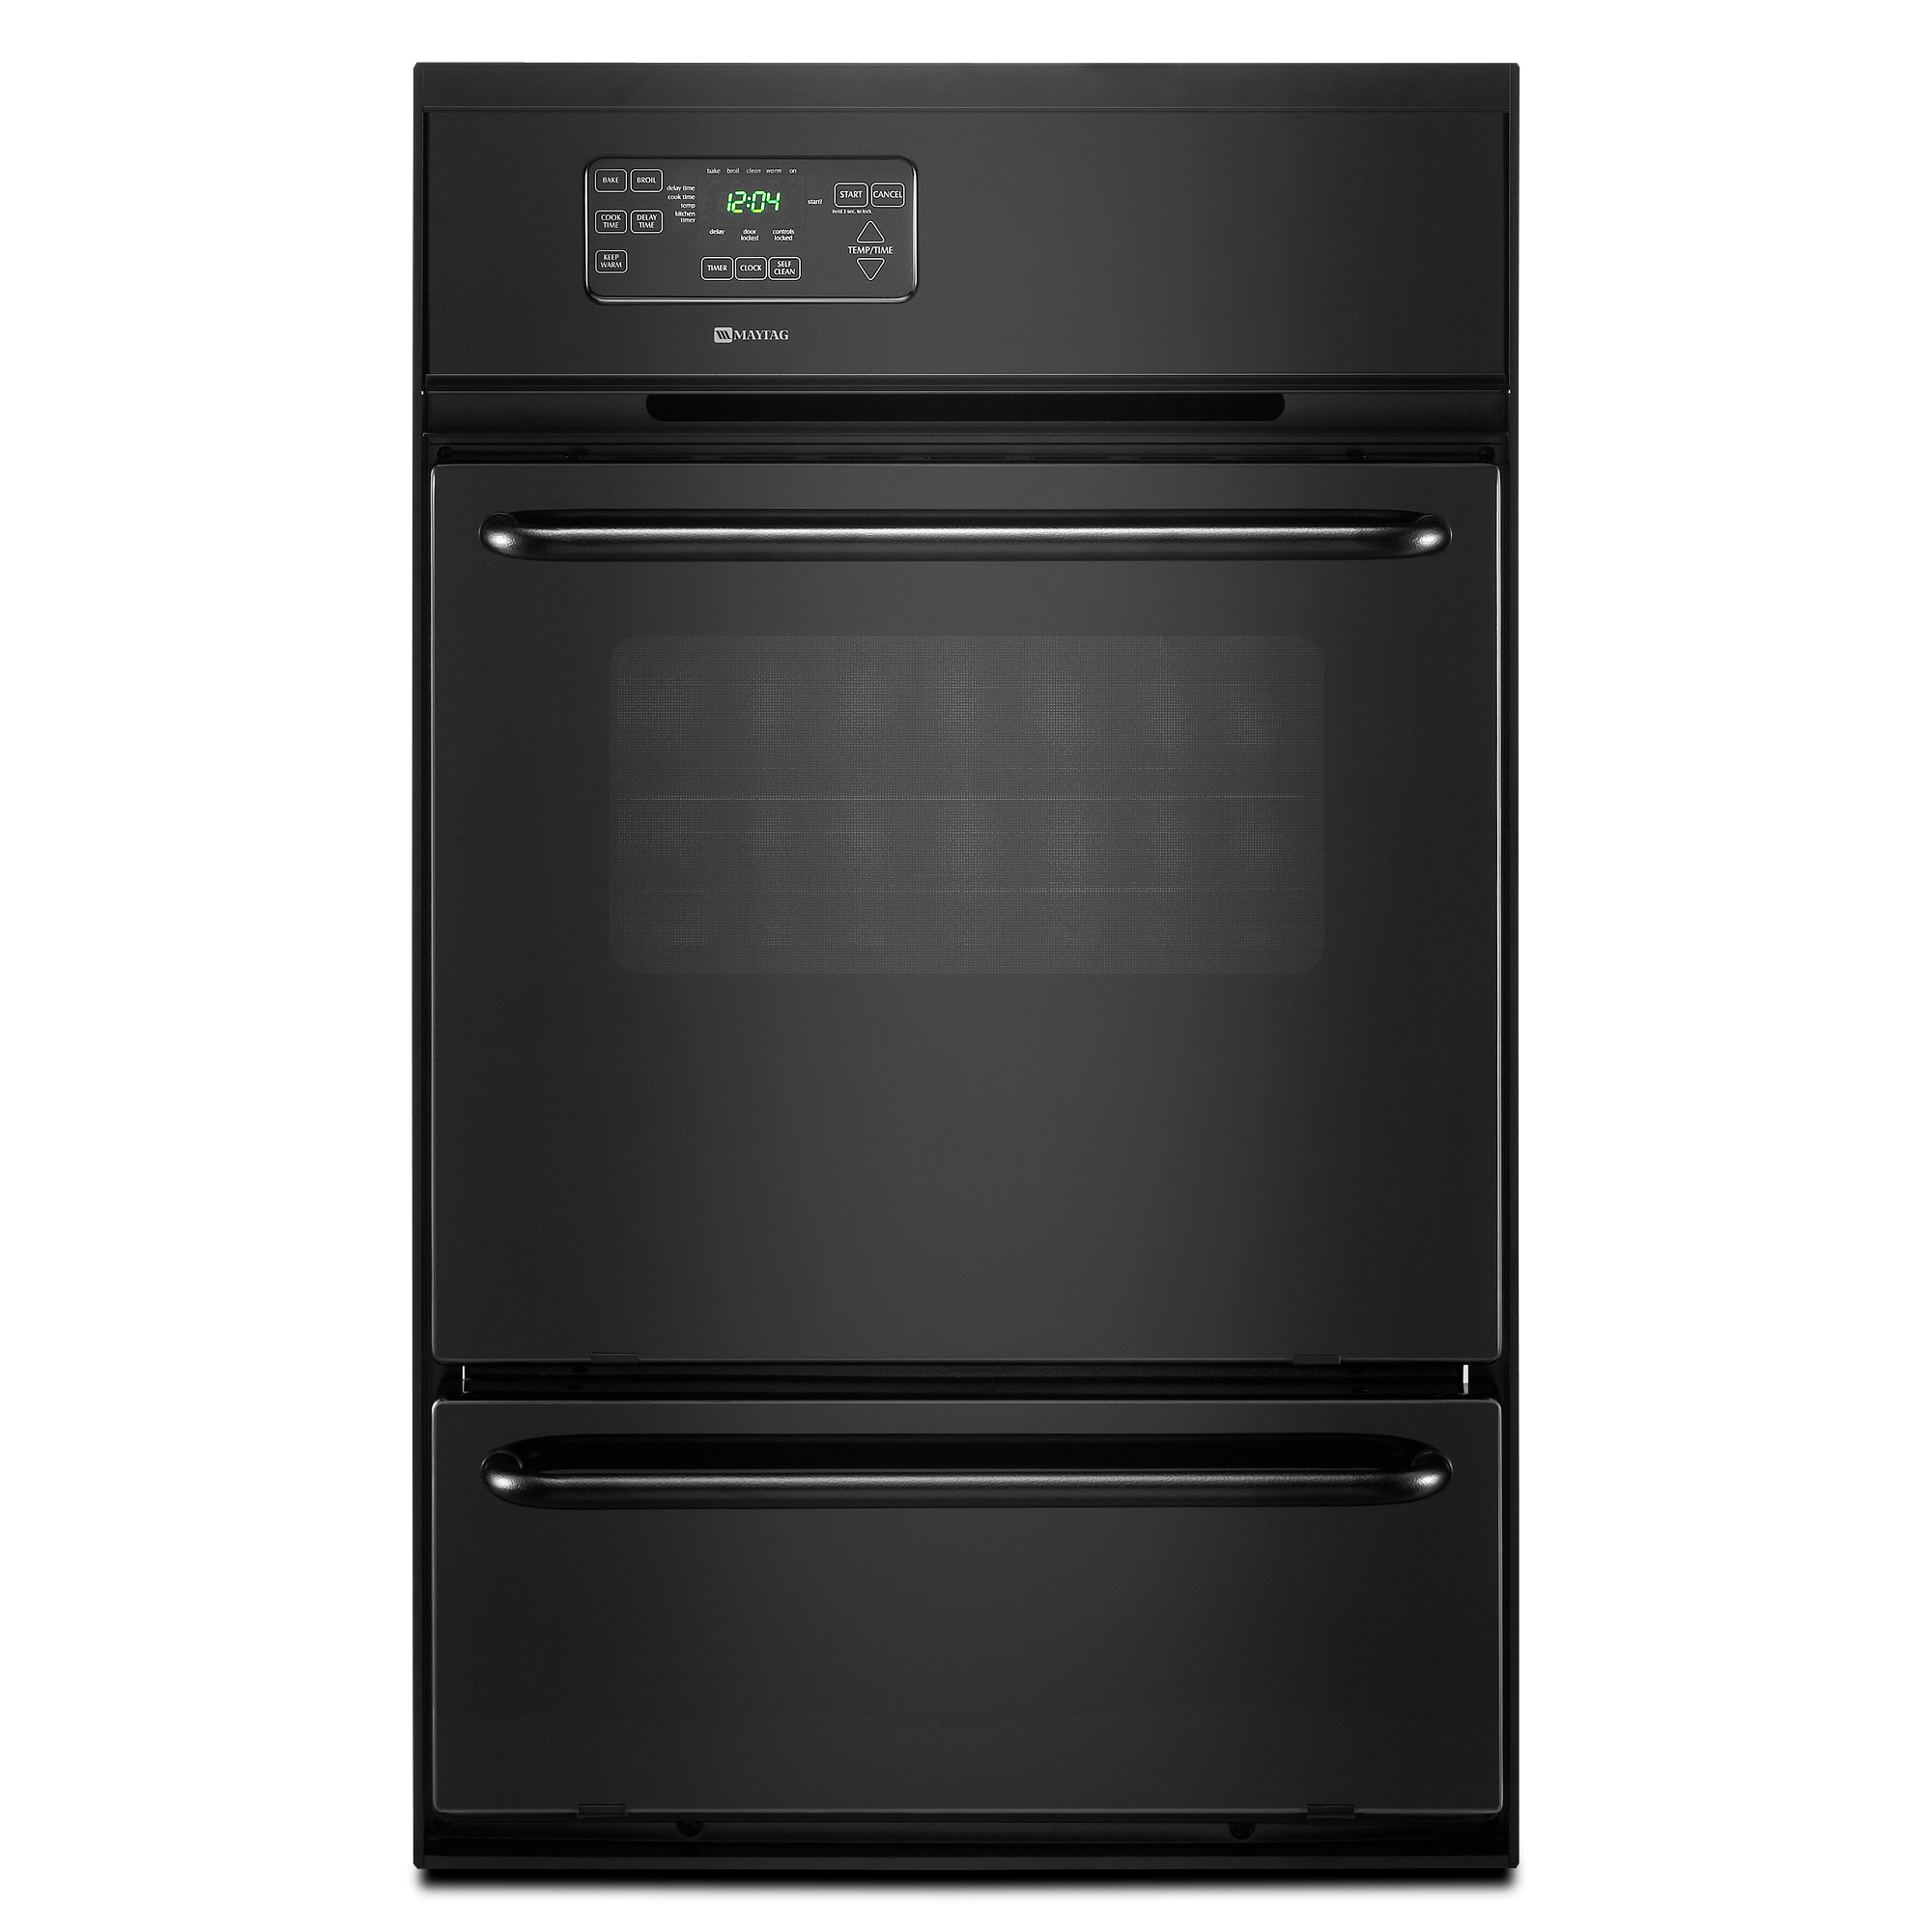 24" Gas Built-In Oven logo